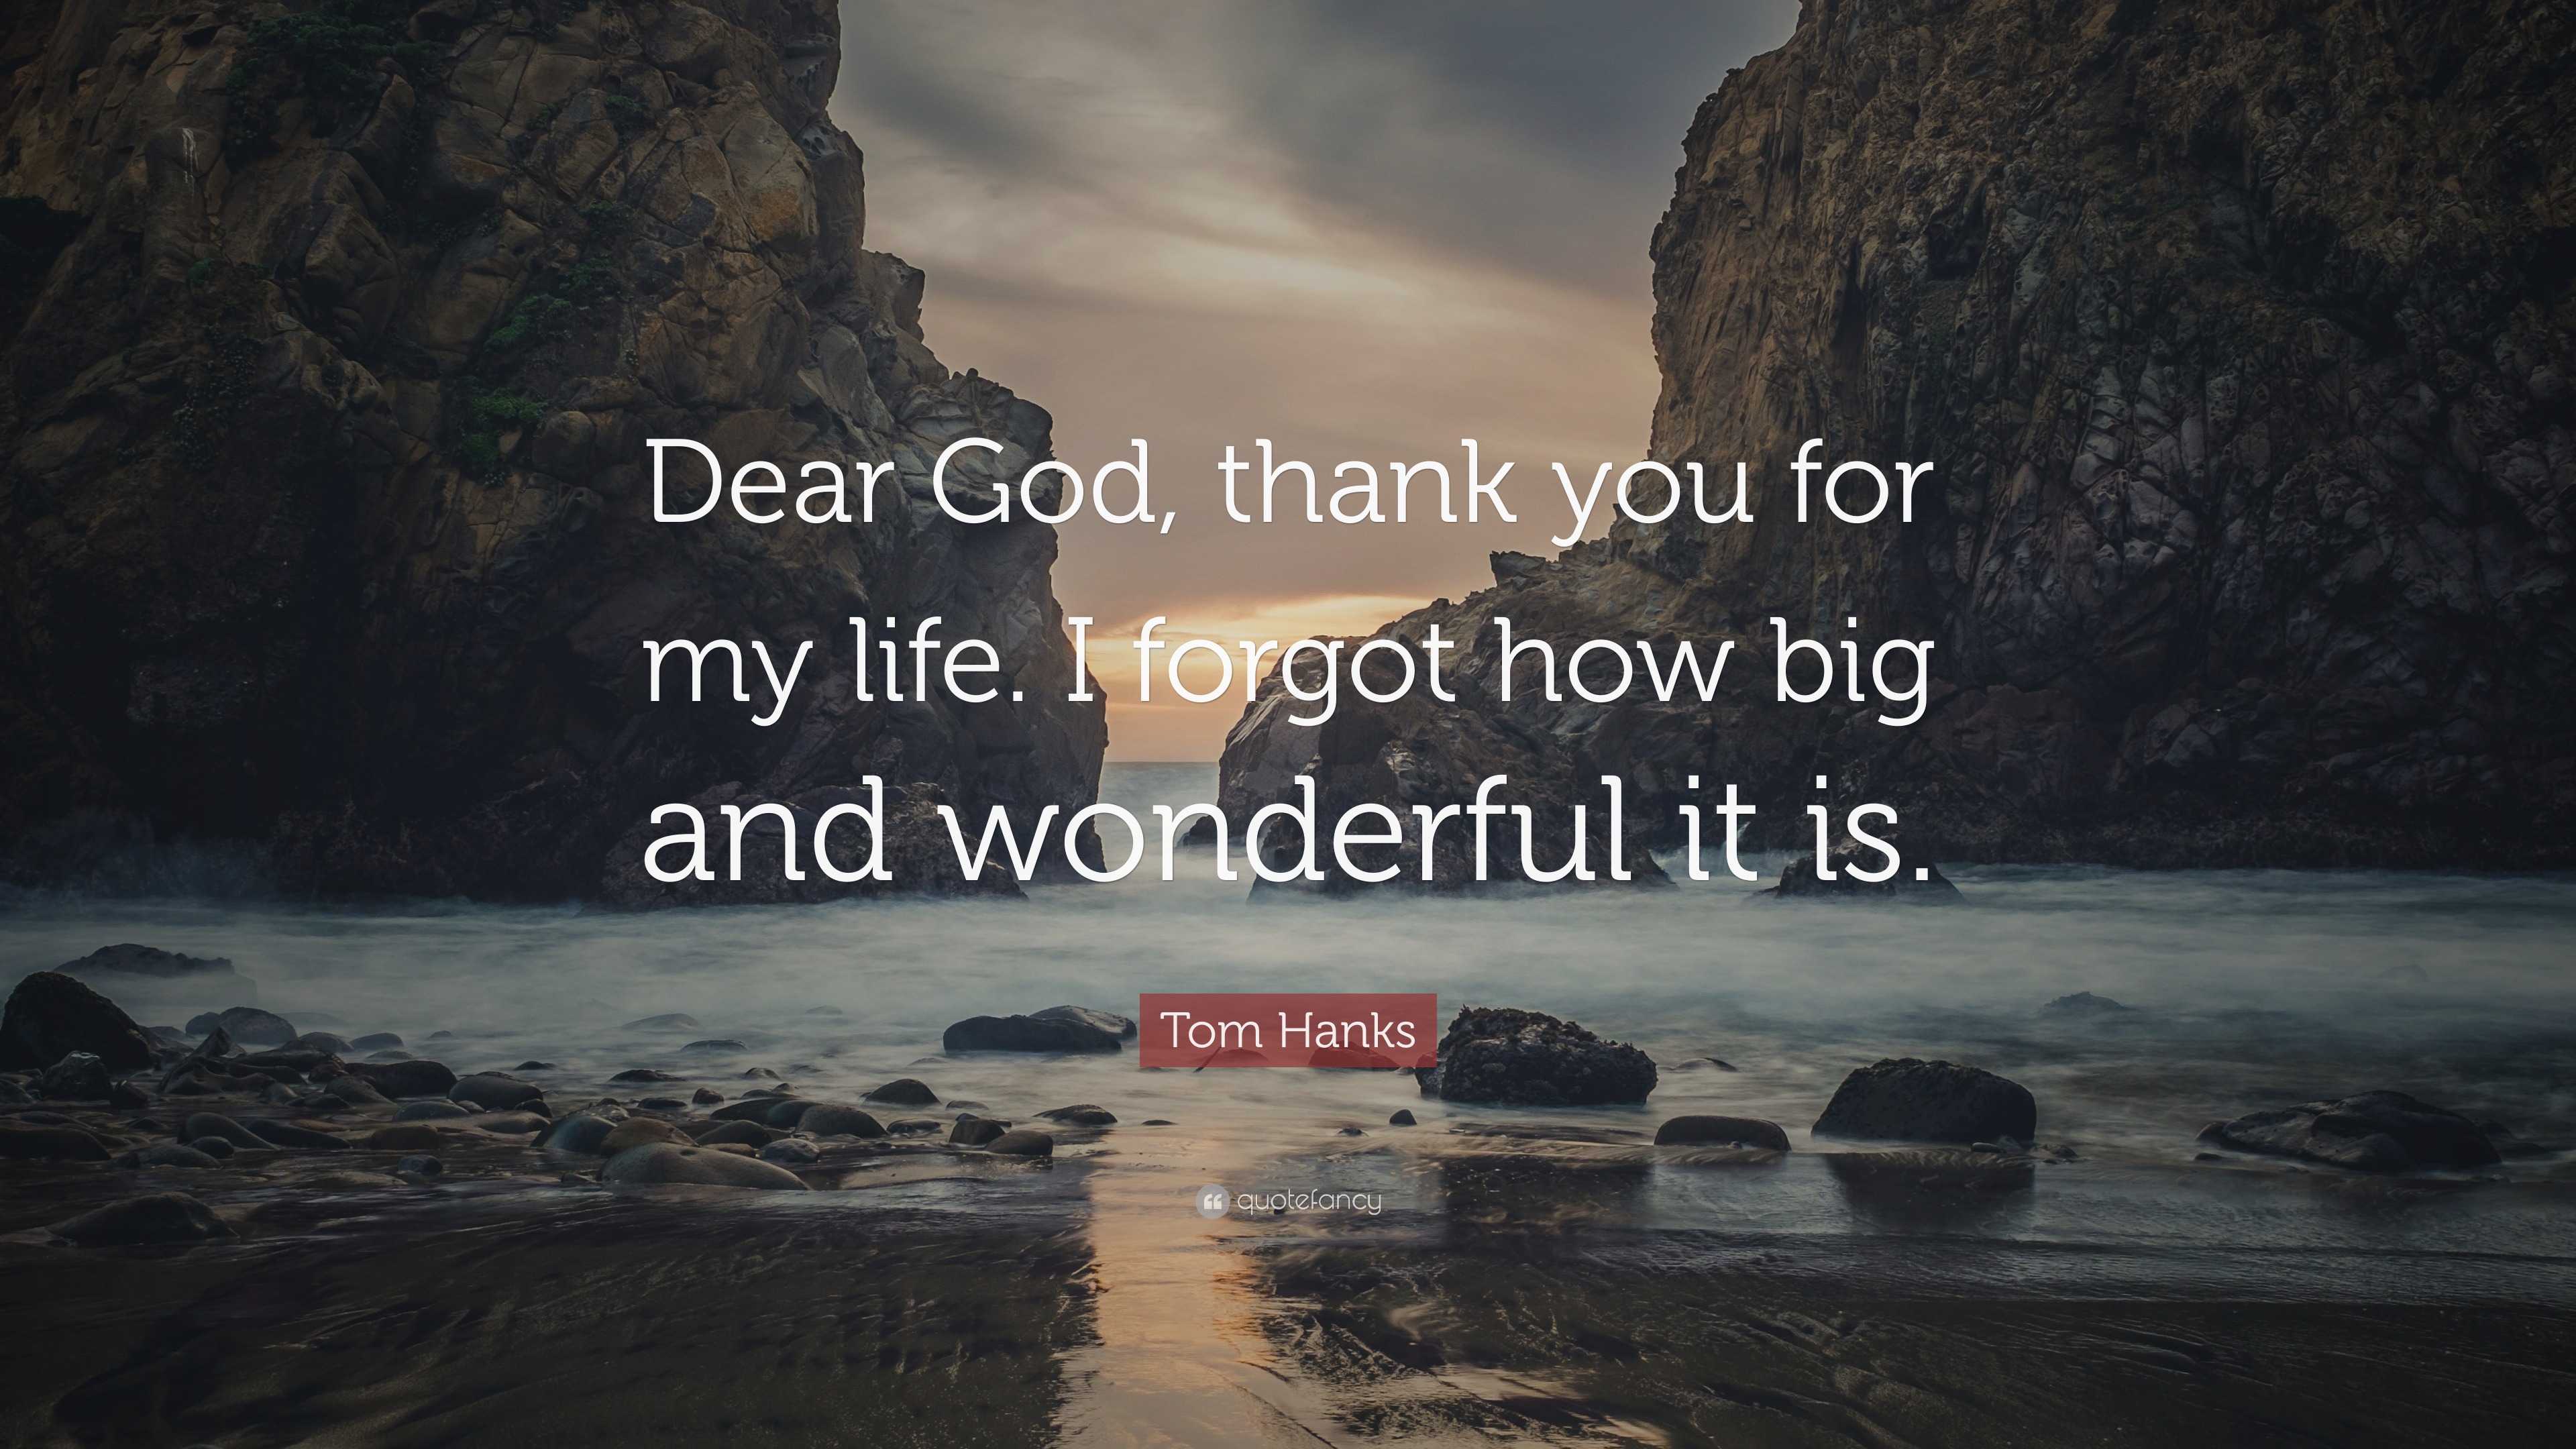 Tom Hanks Quote: “Dear God, thank you for my life. I forgot how